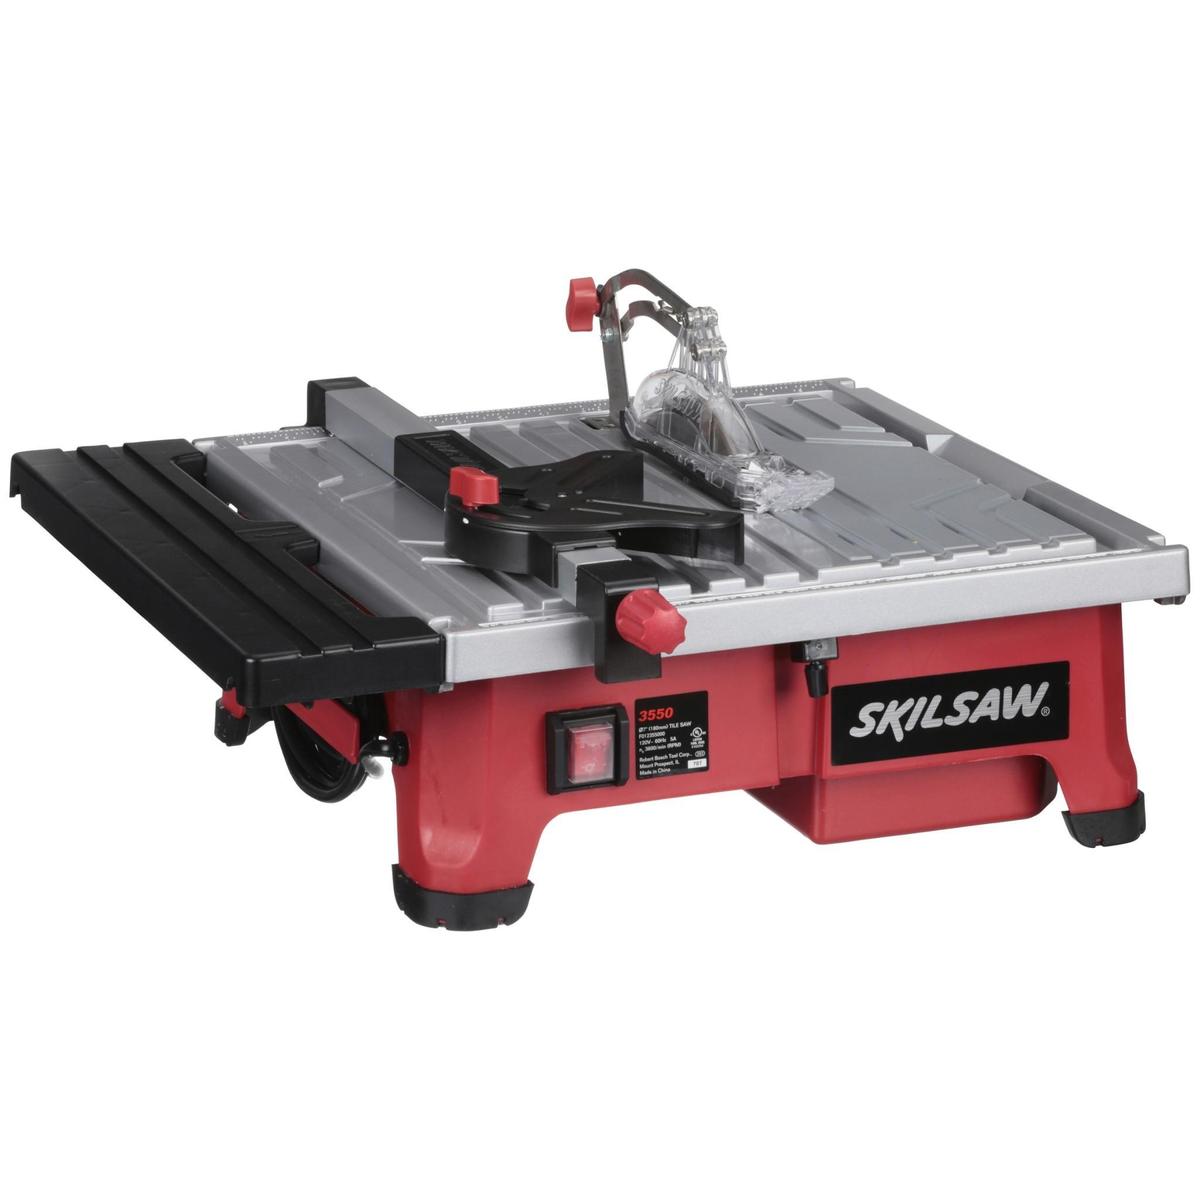 SKILSAW 5-Amp 7-Inch Wet Tile Saw with Hydro Lock System, 3550-02 - $179.93 MSRP